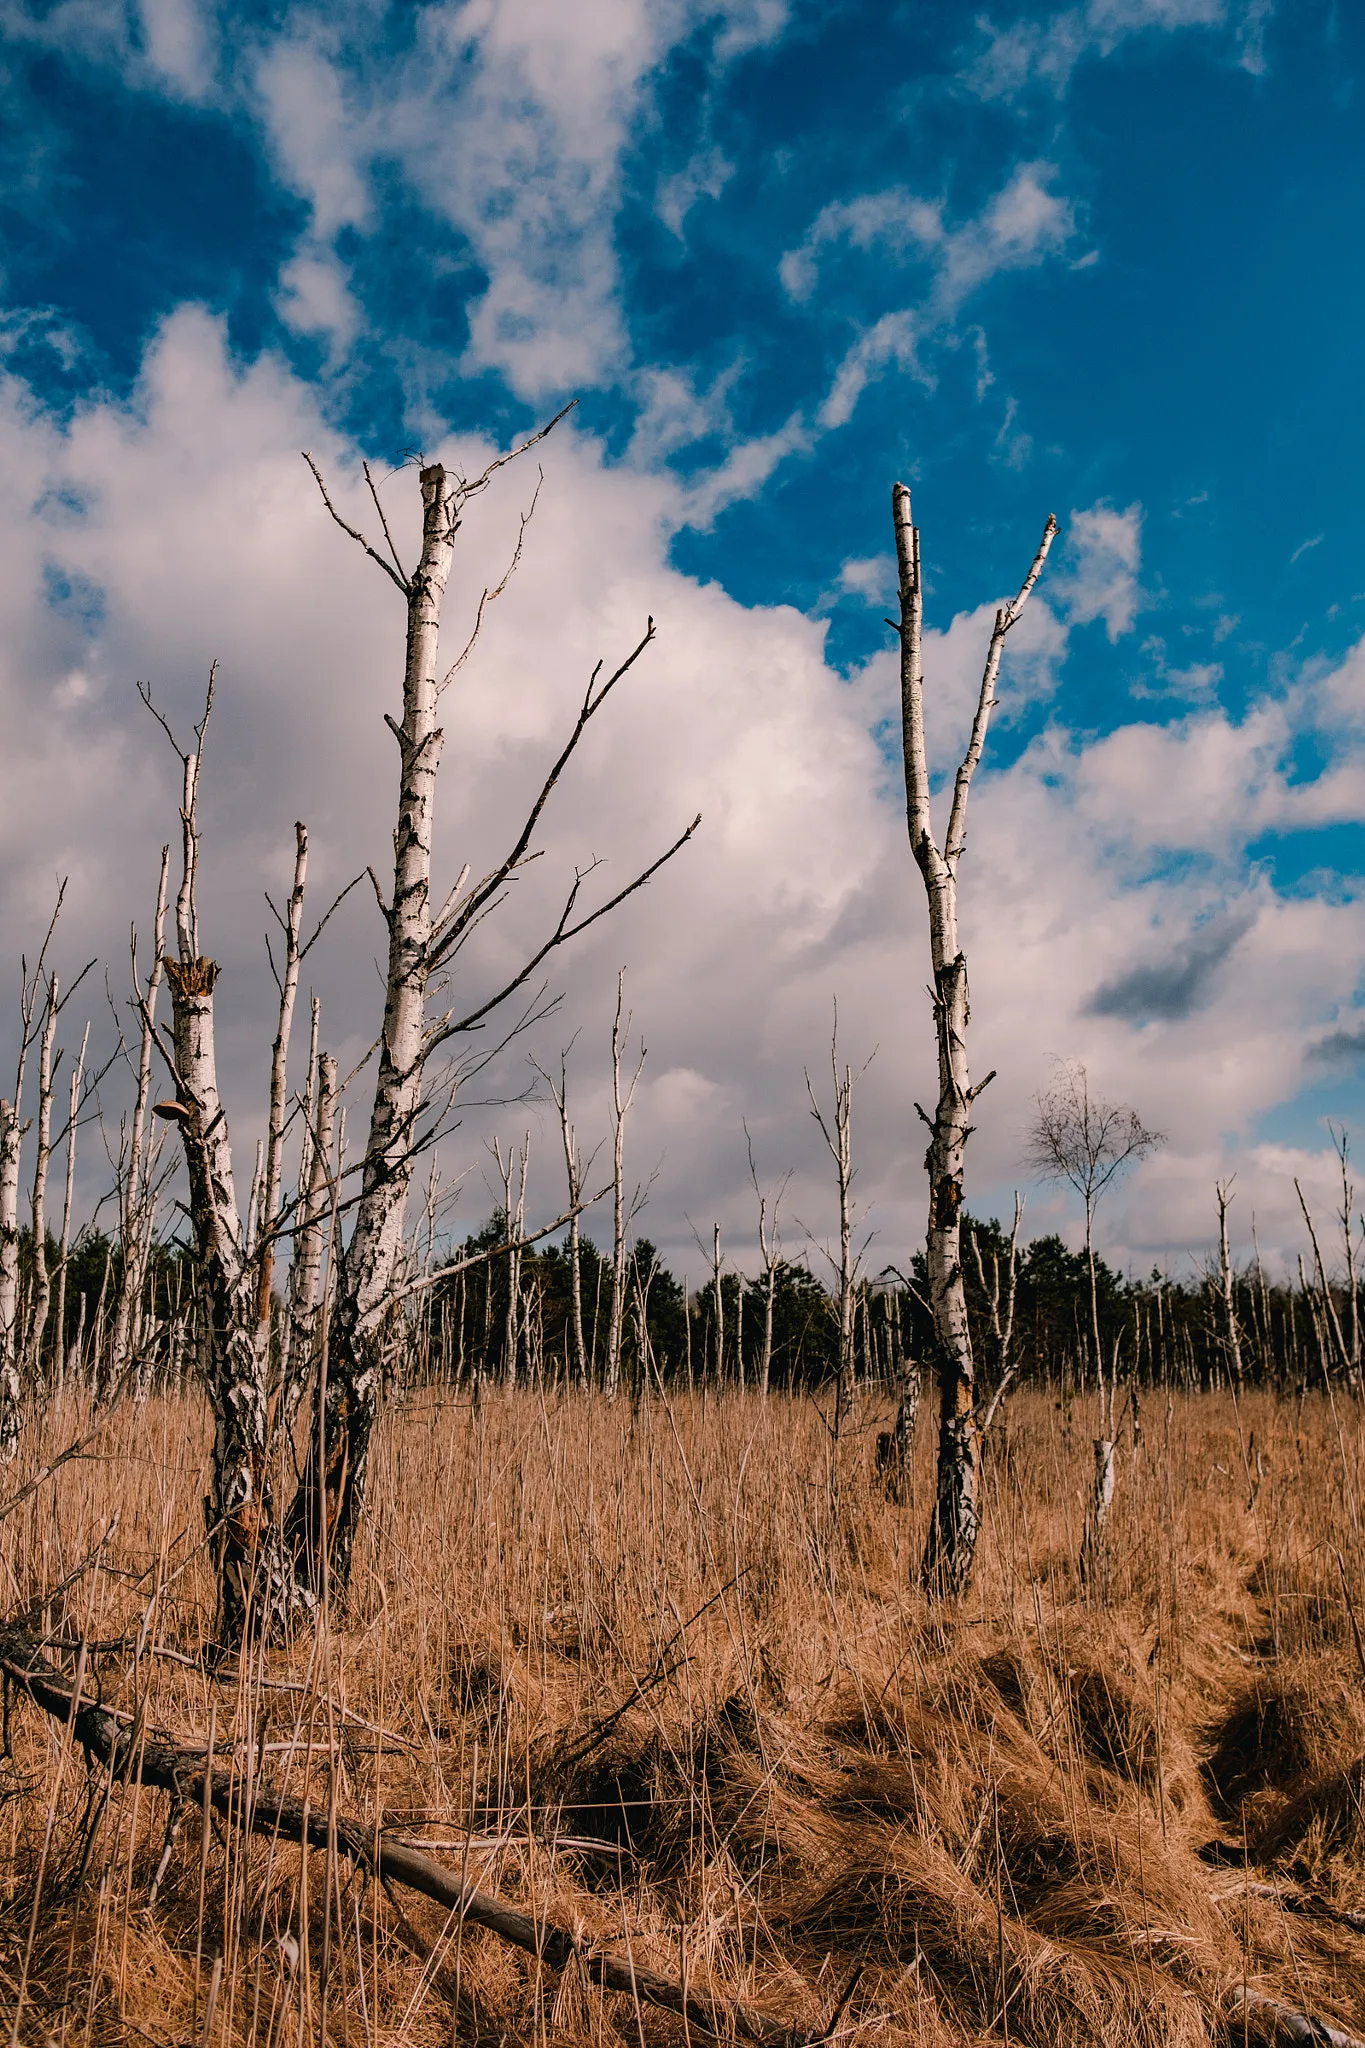 Photo showing: 500px provided description: Kampinos National Park [#trees ,#sky ,#forest ,#spring ,#nature ,#clouds ,#birch ,#dramatic ,#outdoors ,#serene ,#scenery ,#national park ,#beauty in nature ,#tranquil ,#scenic ,#no people ,#kampinos]